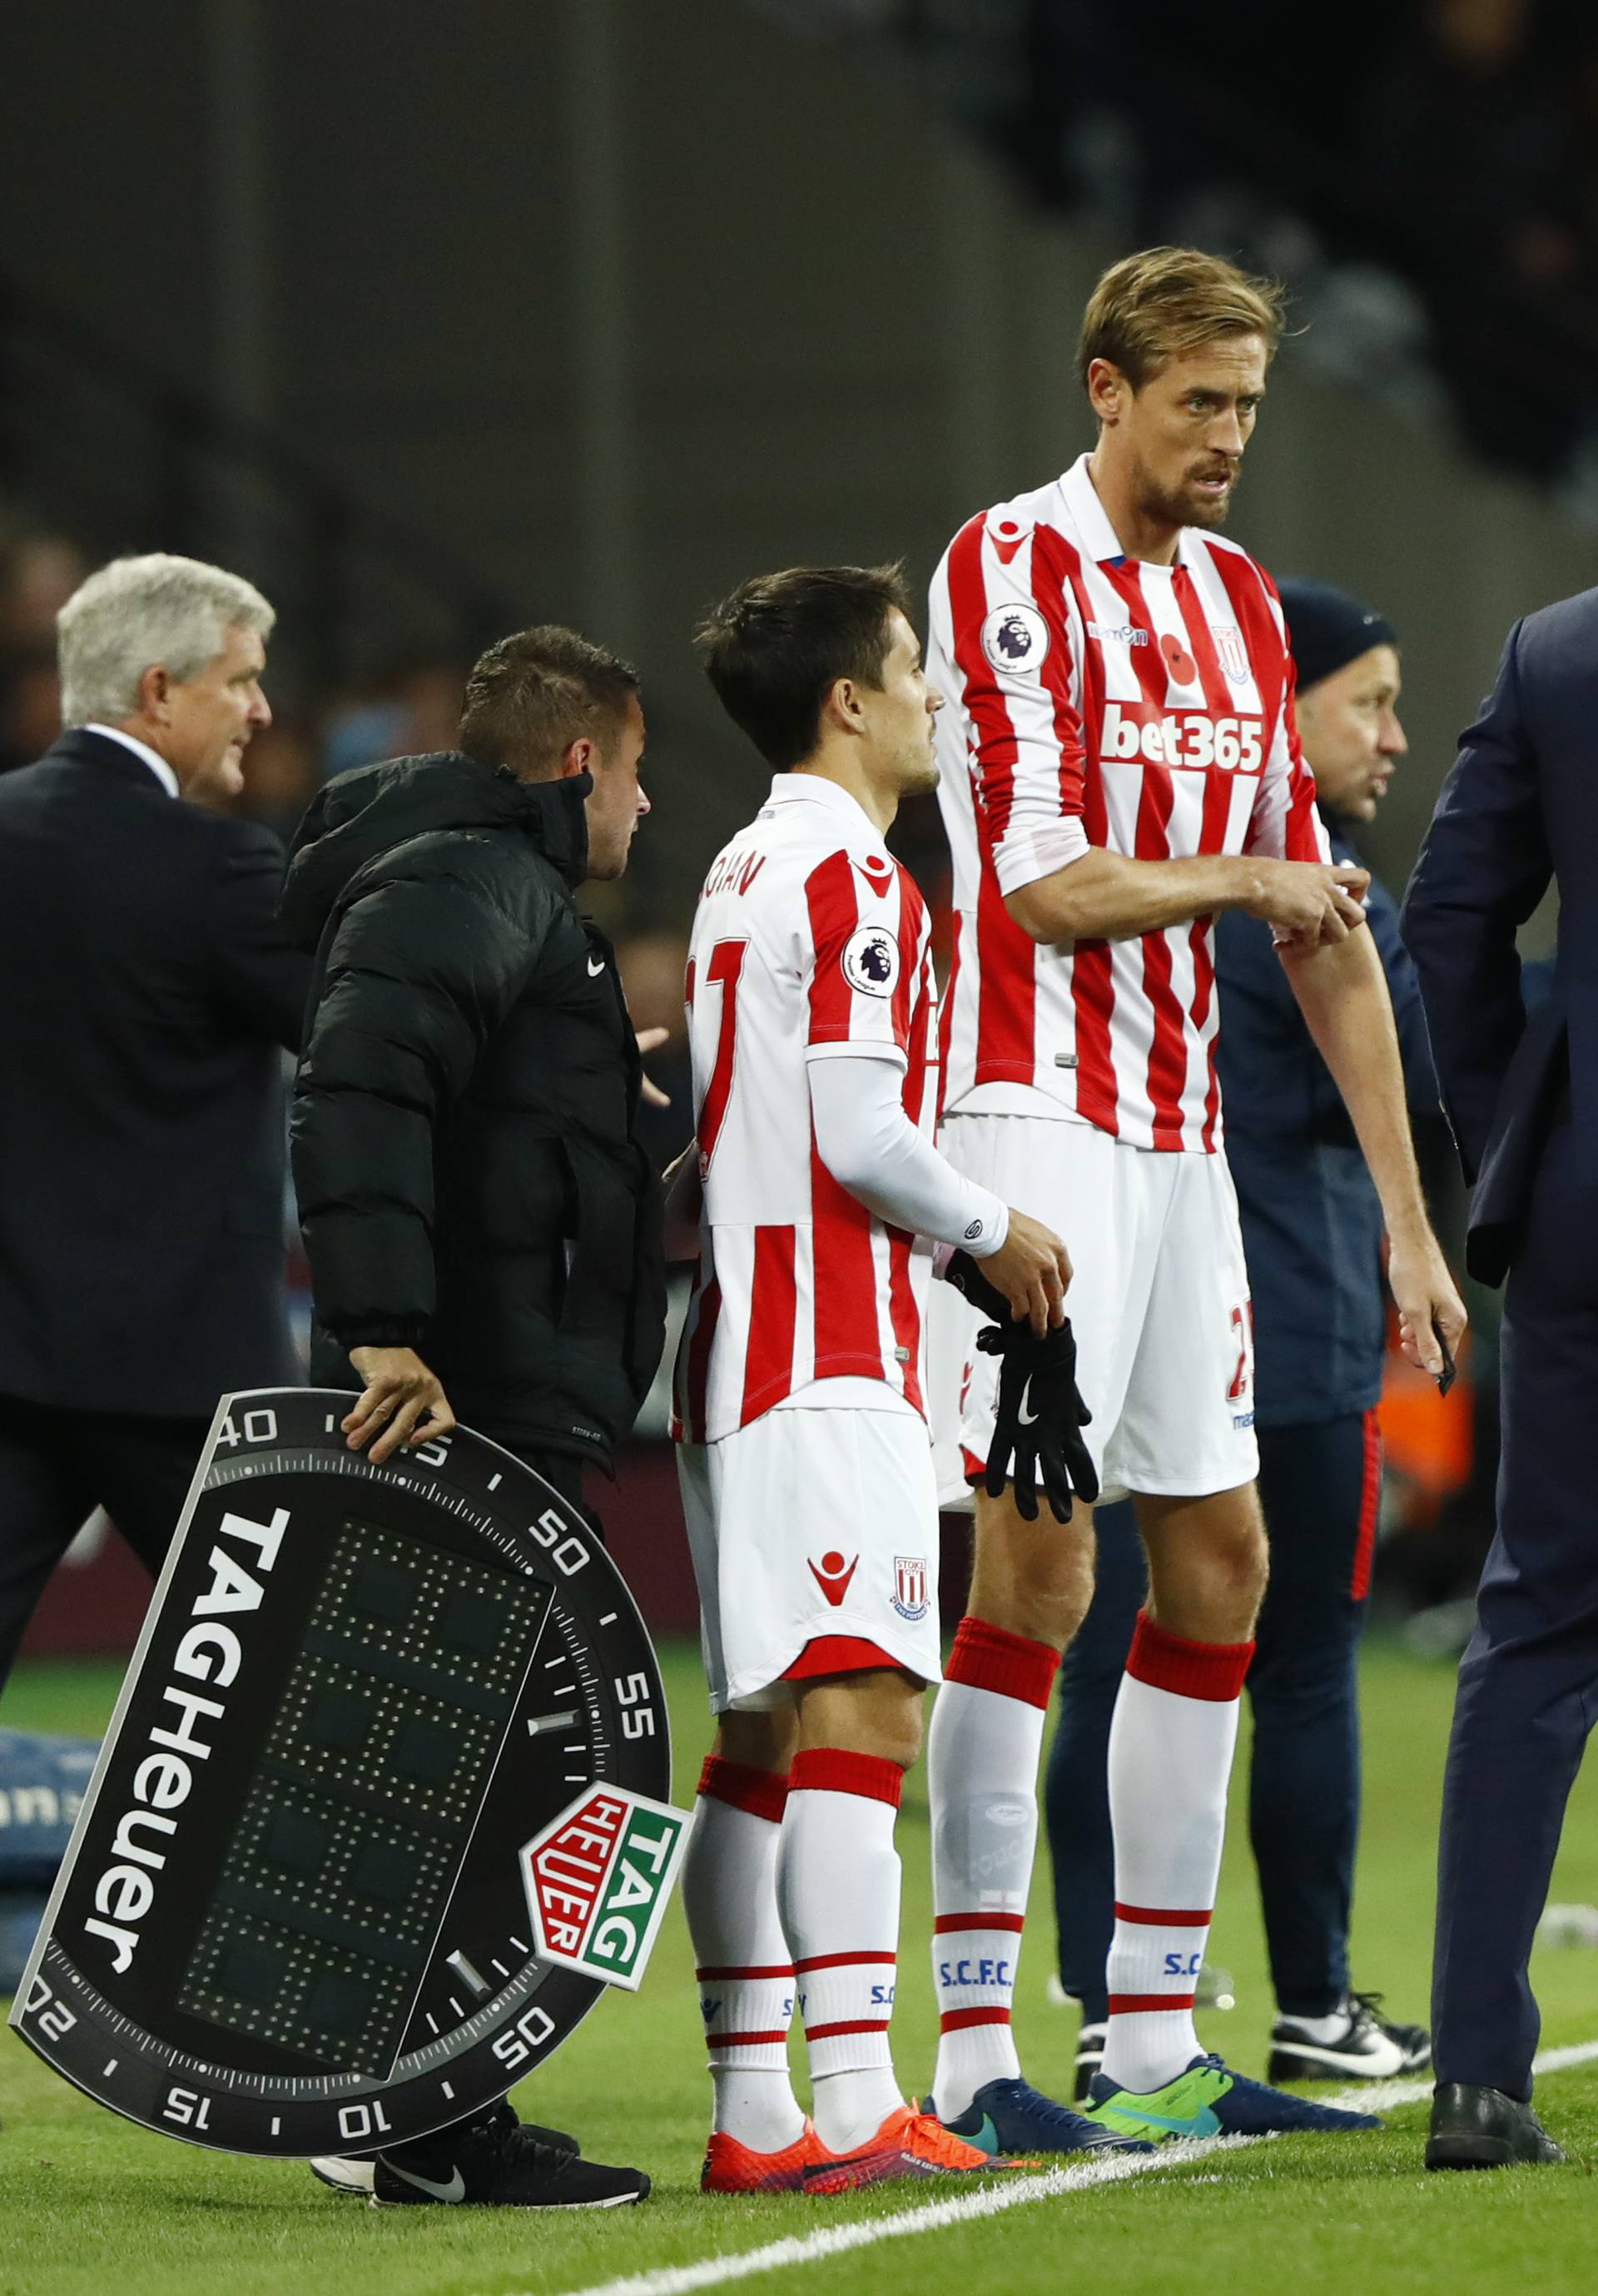 West Ham United manager Slaven Bilic gestures as Stoke City's Peter Crouch and Bojan Krkic wait to be substituted on